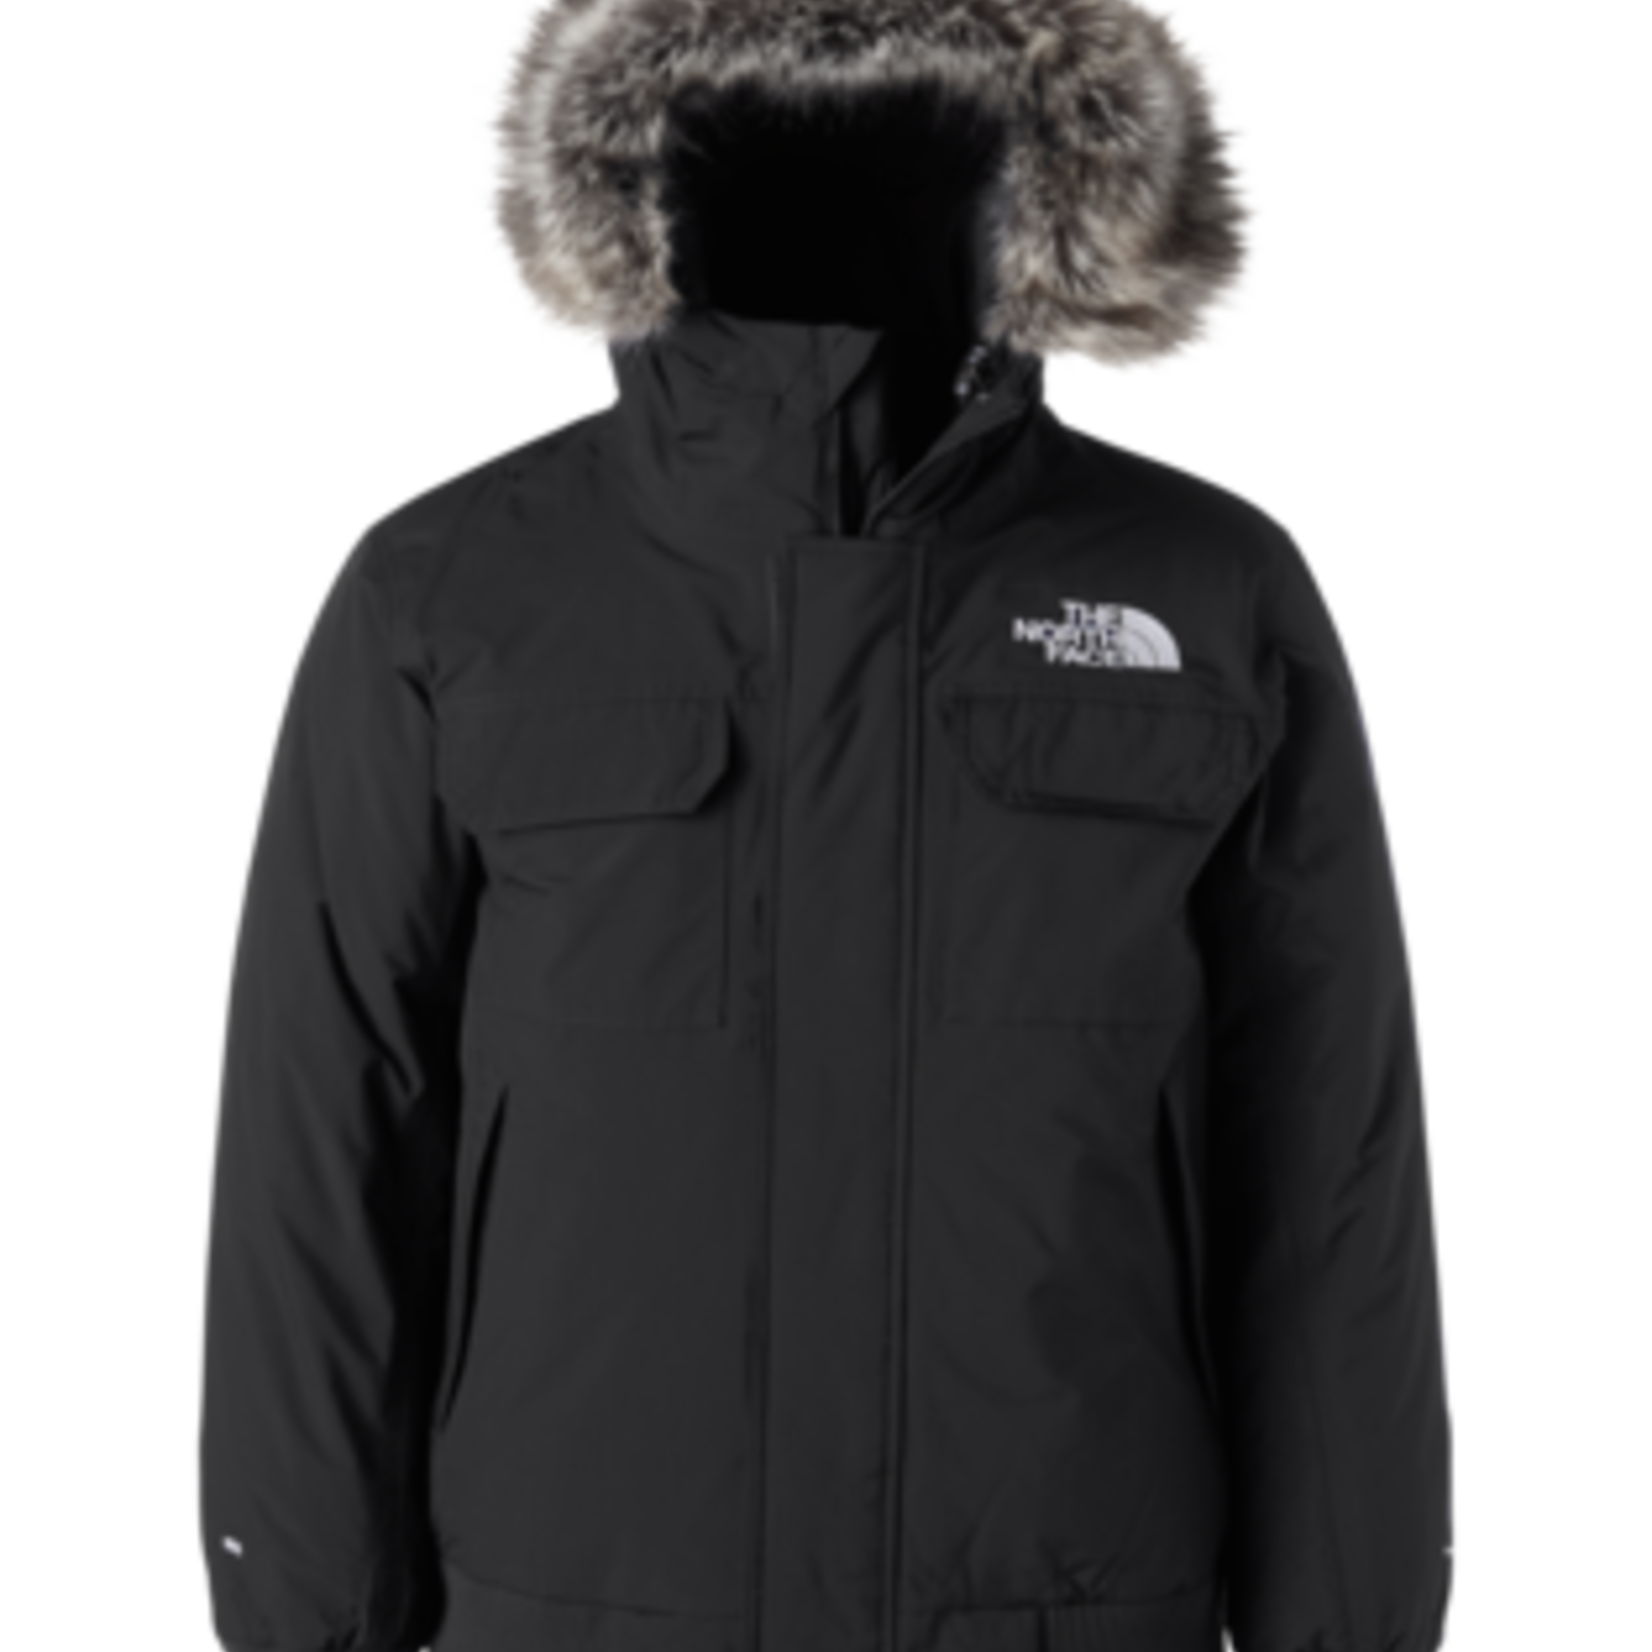 The North Face The North Face Winter Jacket, McMurdo Bomber, Mens